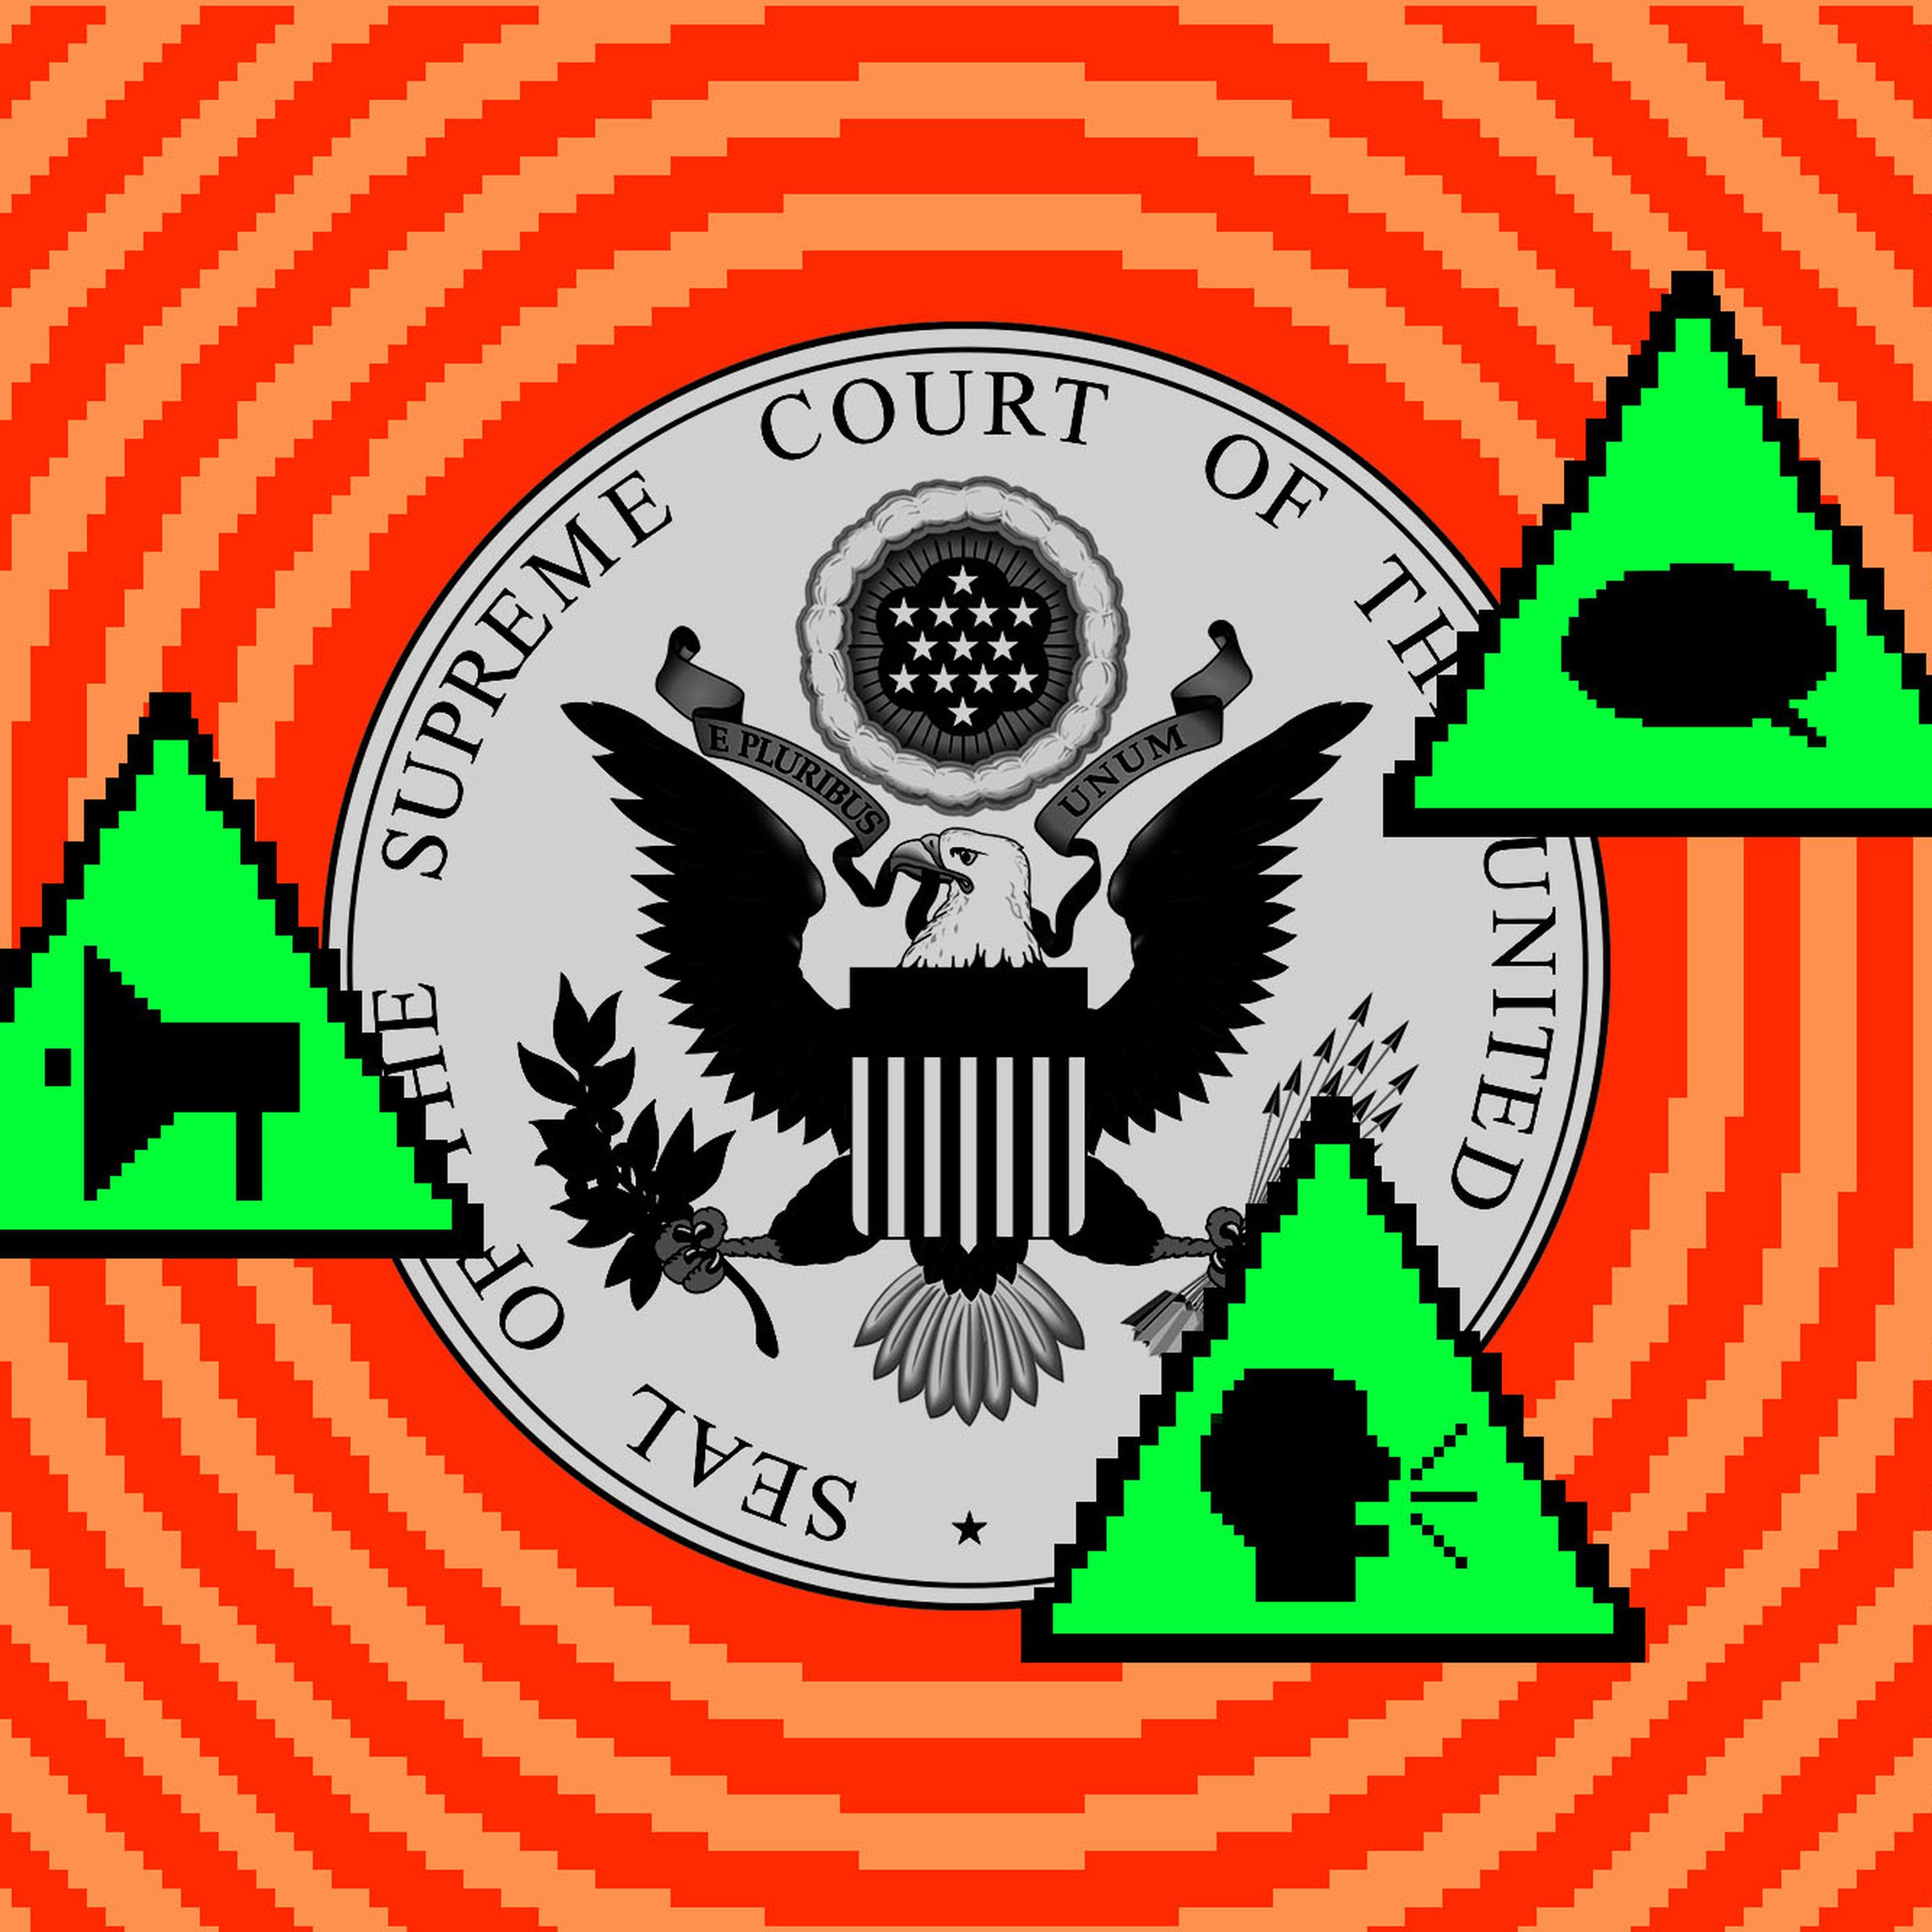 Photo illustration of the seal of the Supreme Court building with warning signs.